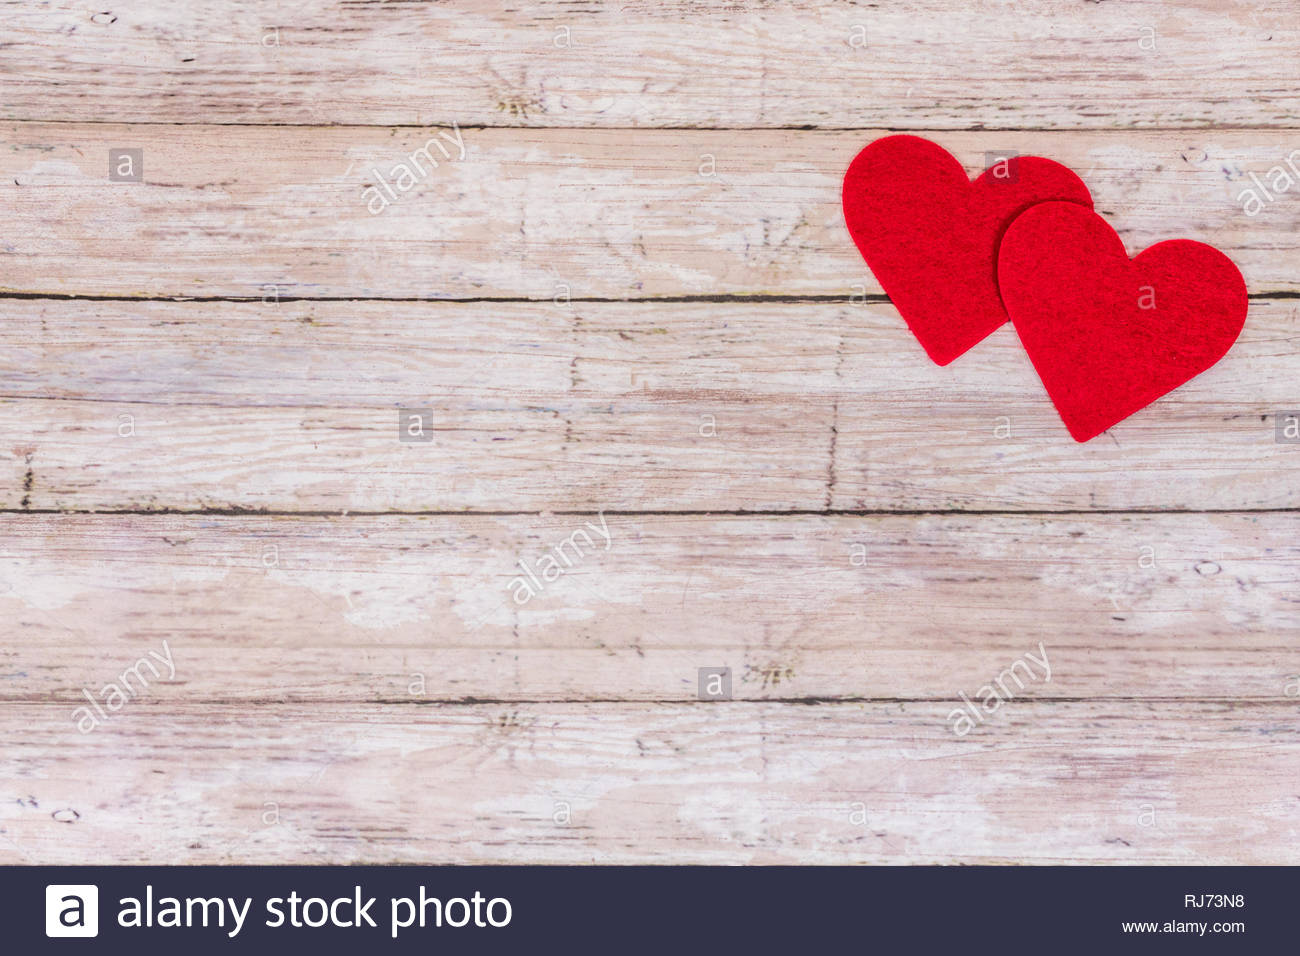 White wooden Saint Valentines day background with red hearts